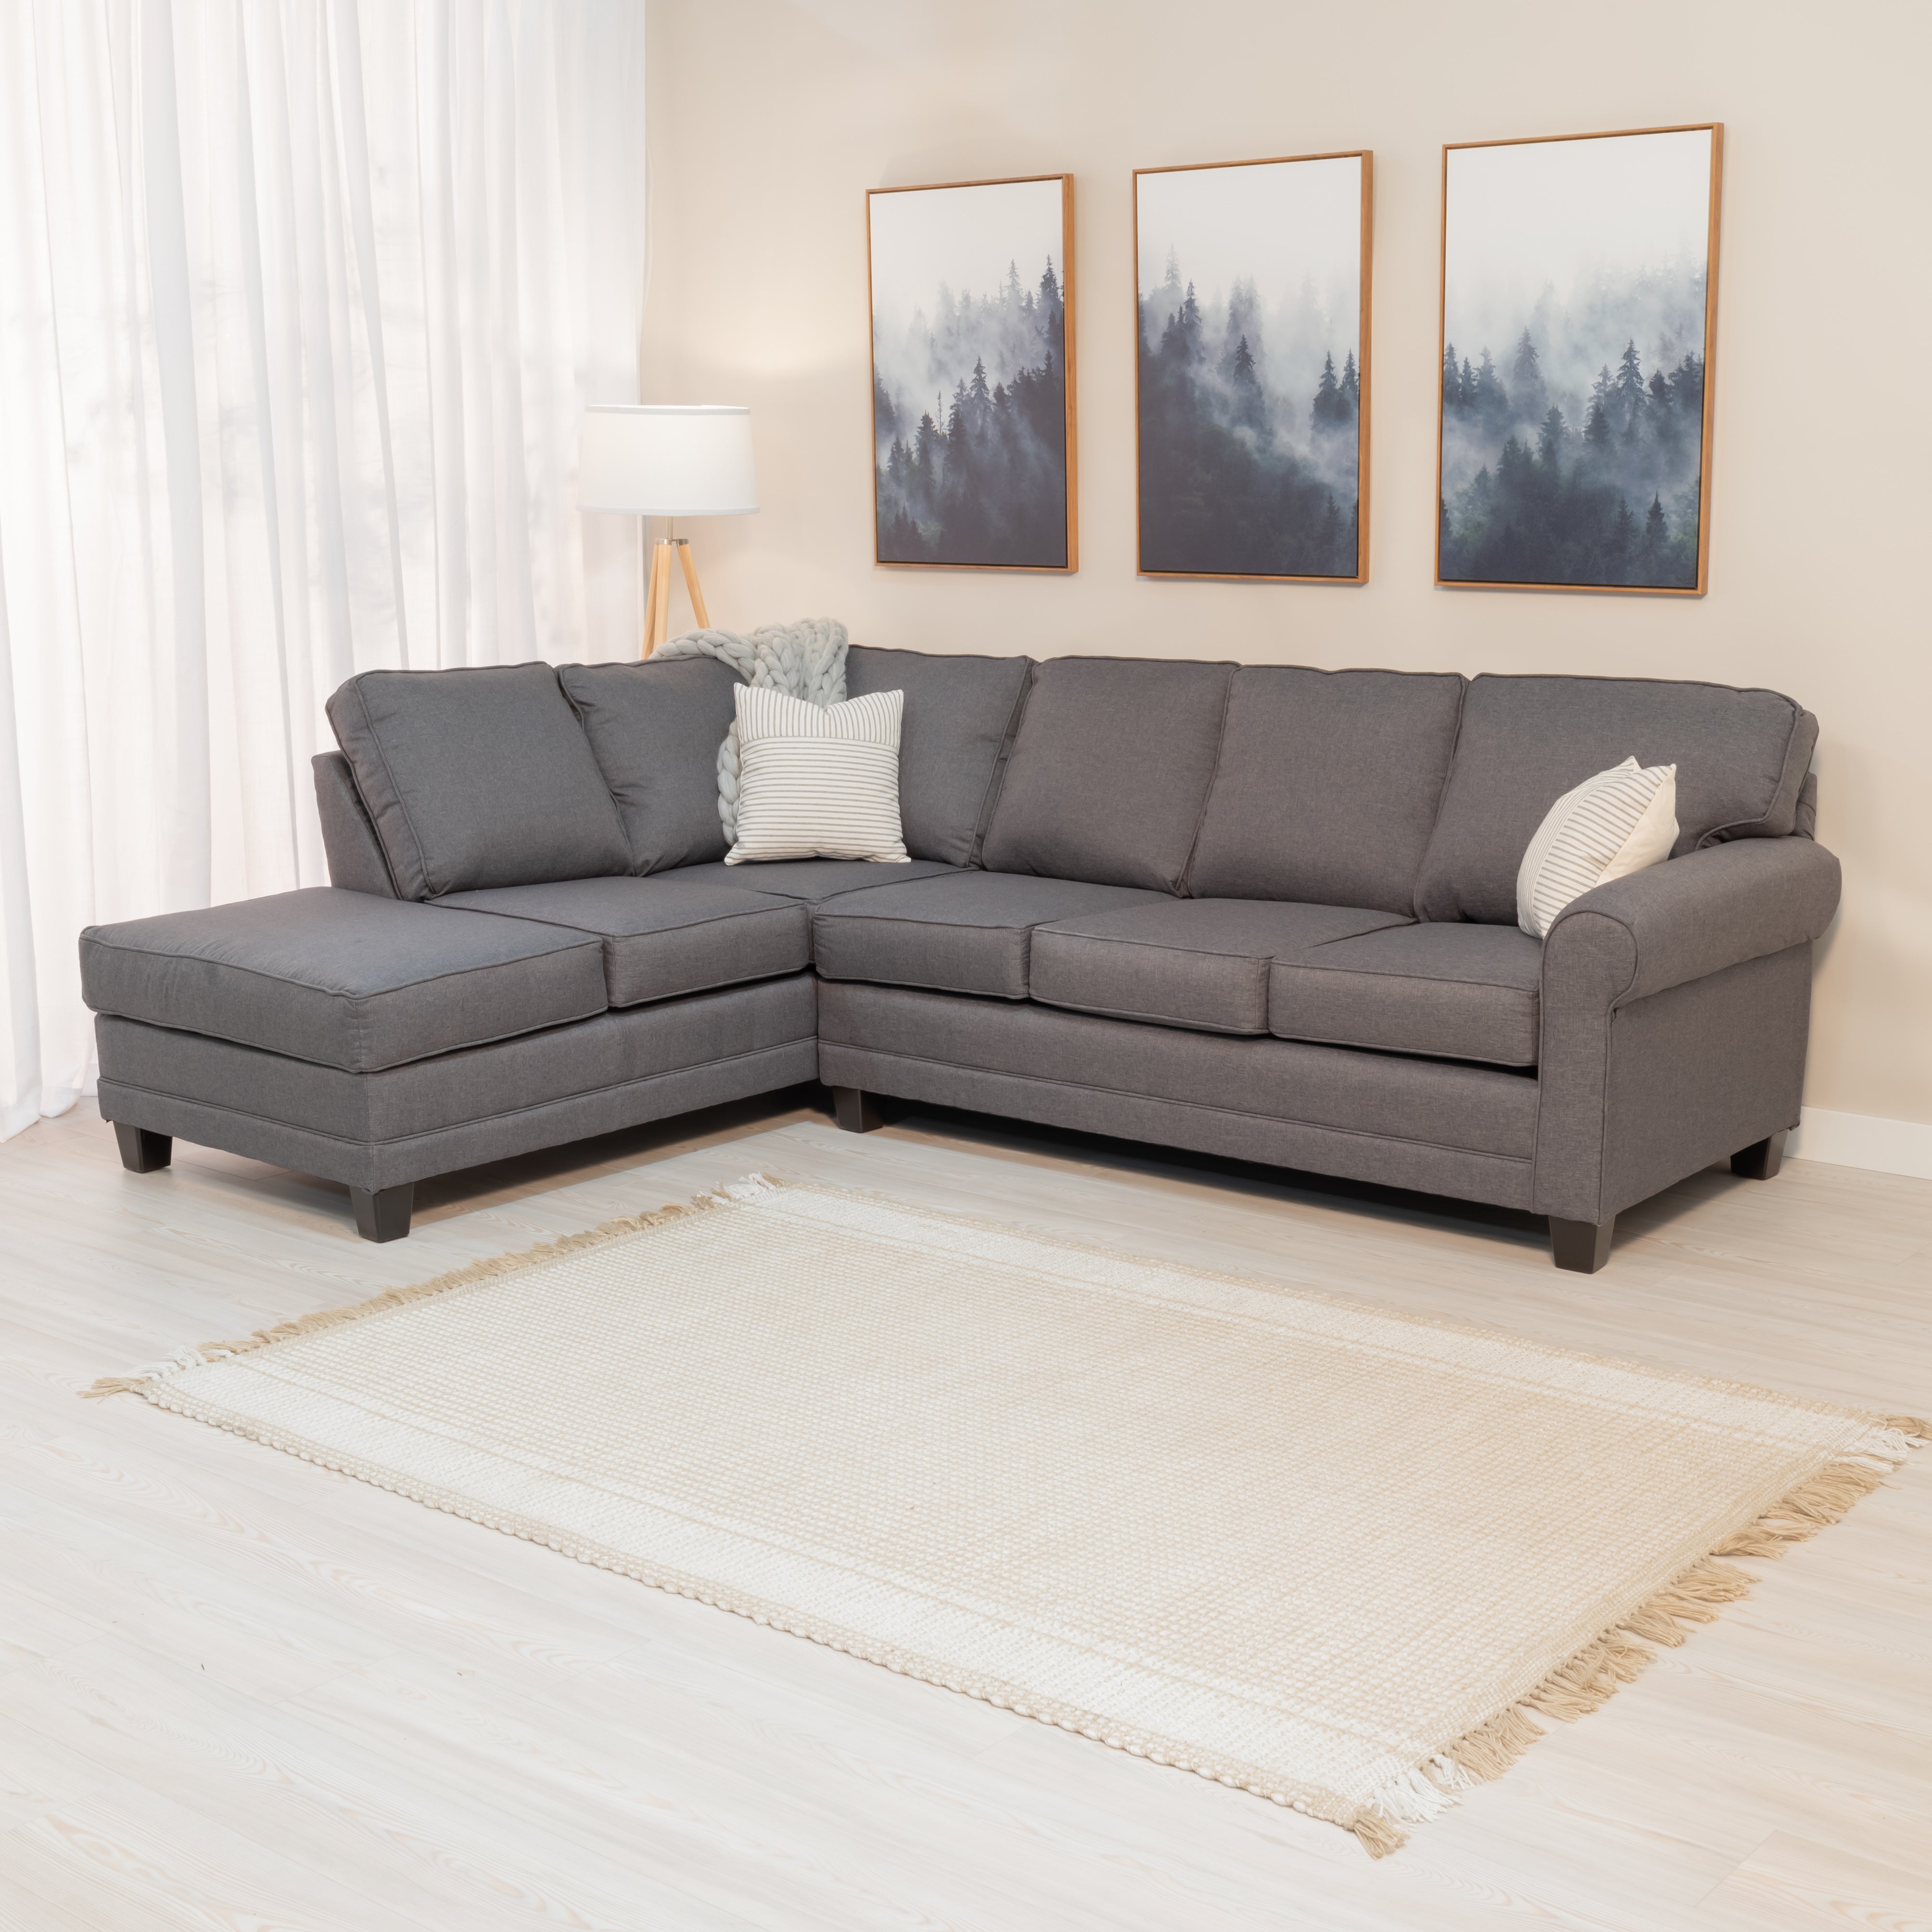 Addington Co Sheffield Extra-Large Upholstery Fabric Left-Facing Sectional Sofa for Living Room, L-Shaped, Grey, 6-Seat